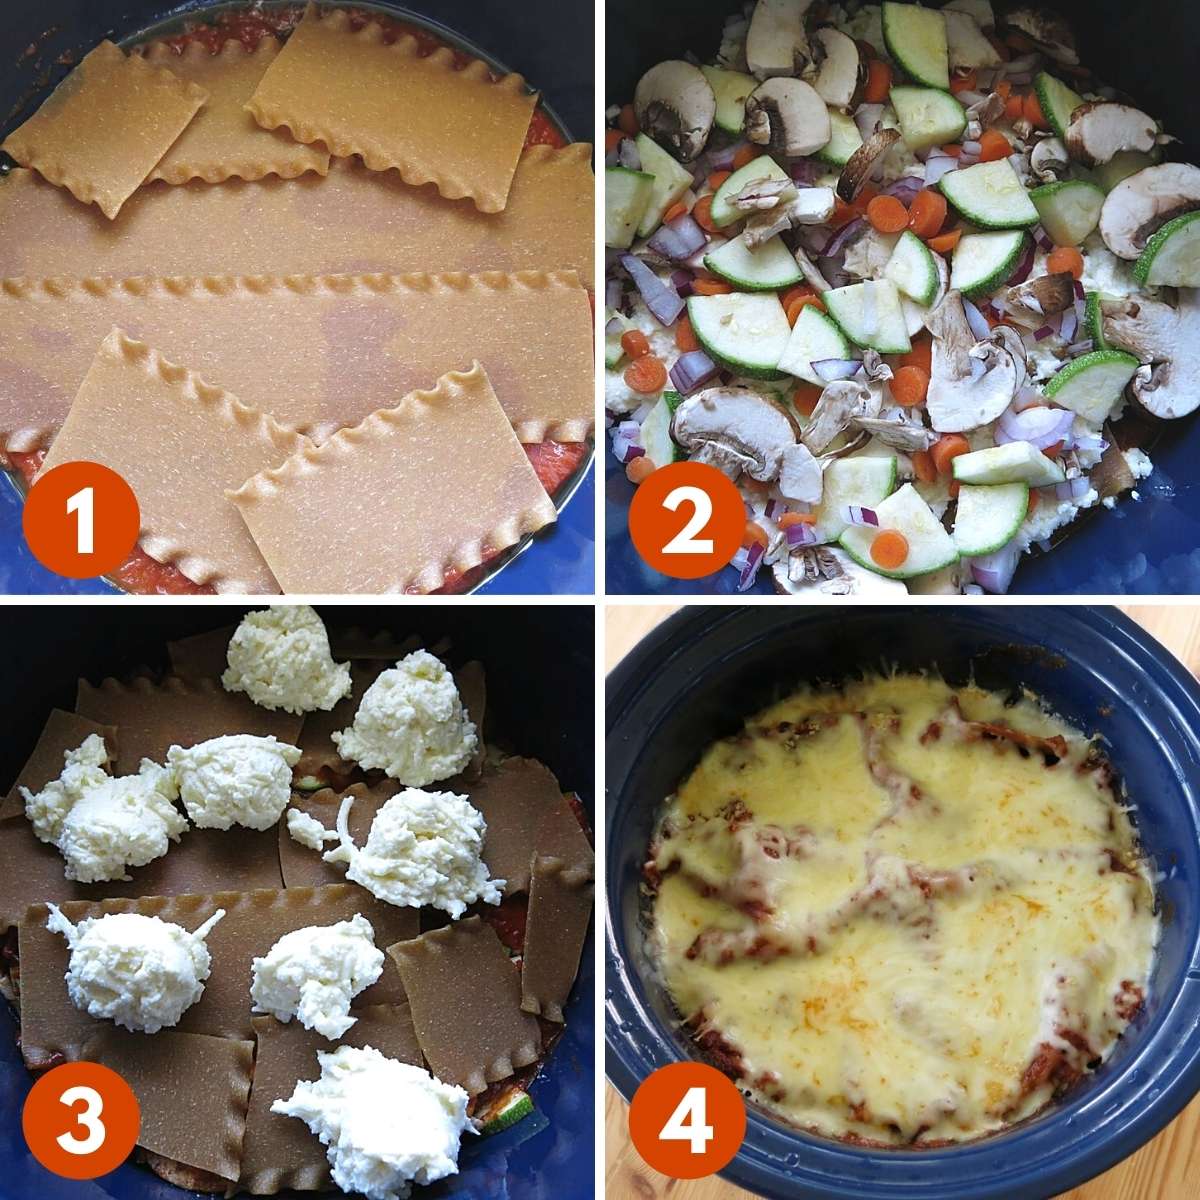 Collage of 4 main steps in slow cooker lasagna recipe. 1) Broken lasagna sheets in crock-pot. 2) Layer of zucchini, mushrooms, onions. 3) Cheesy ricotta mixture in balls 4) Cooked lasagna in slow cooker.